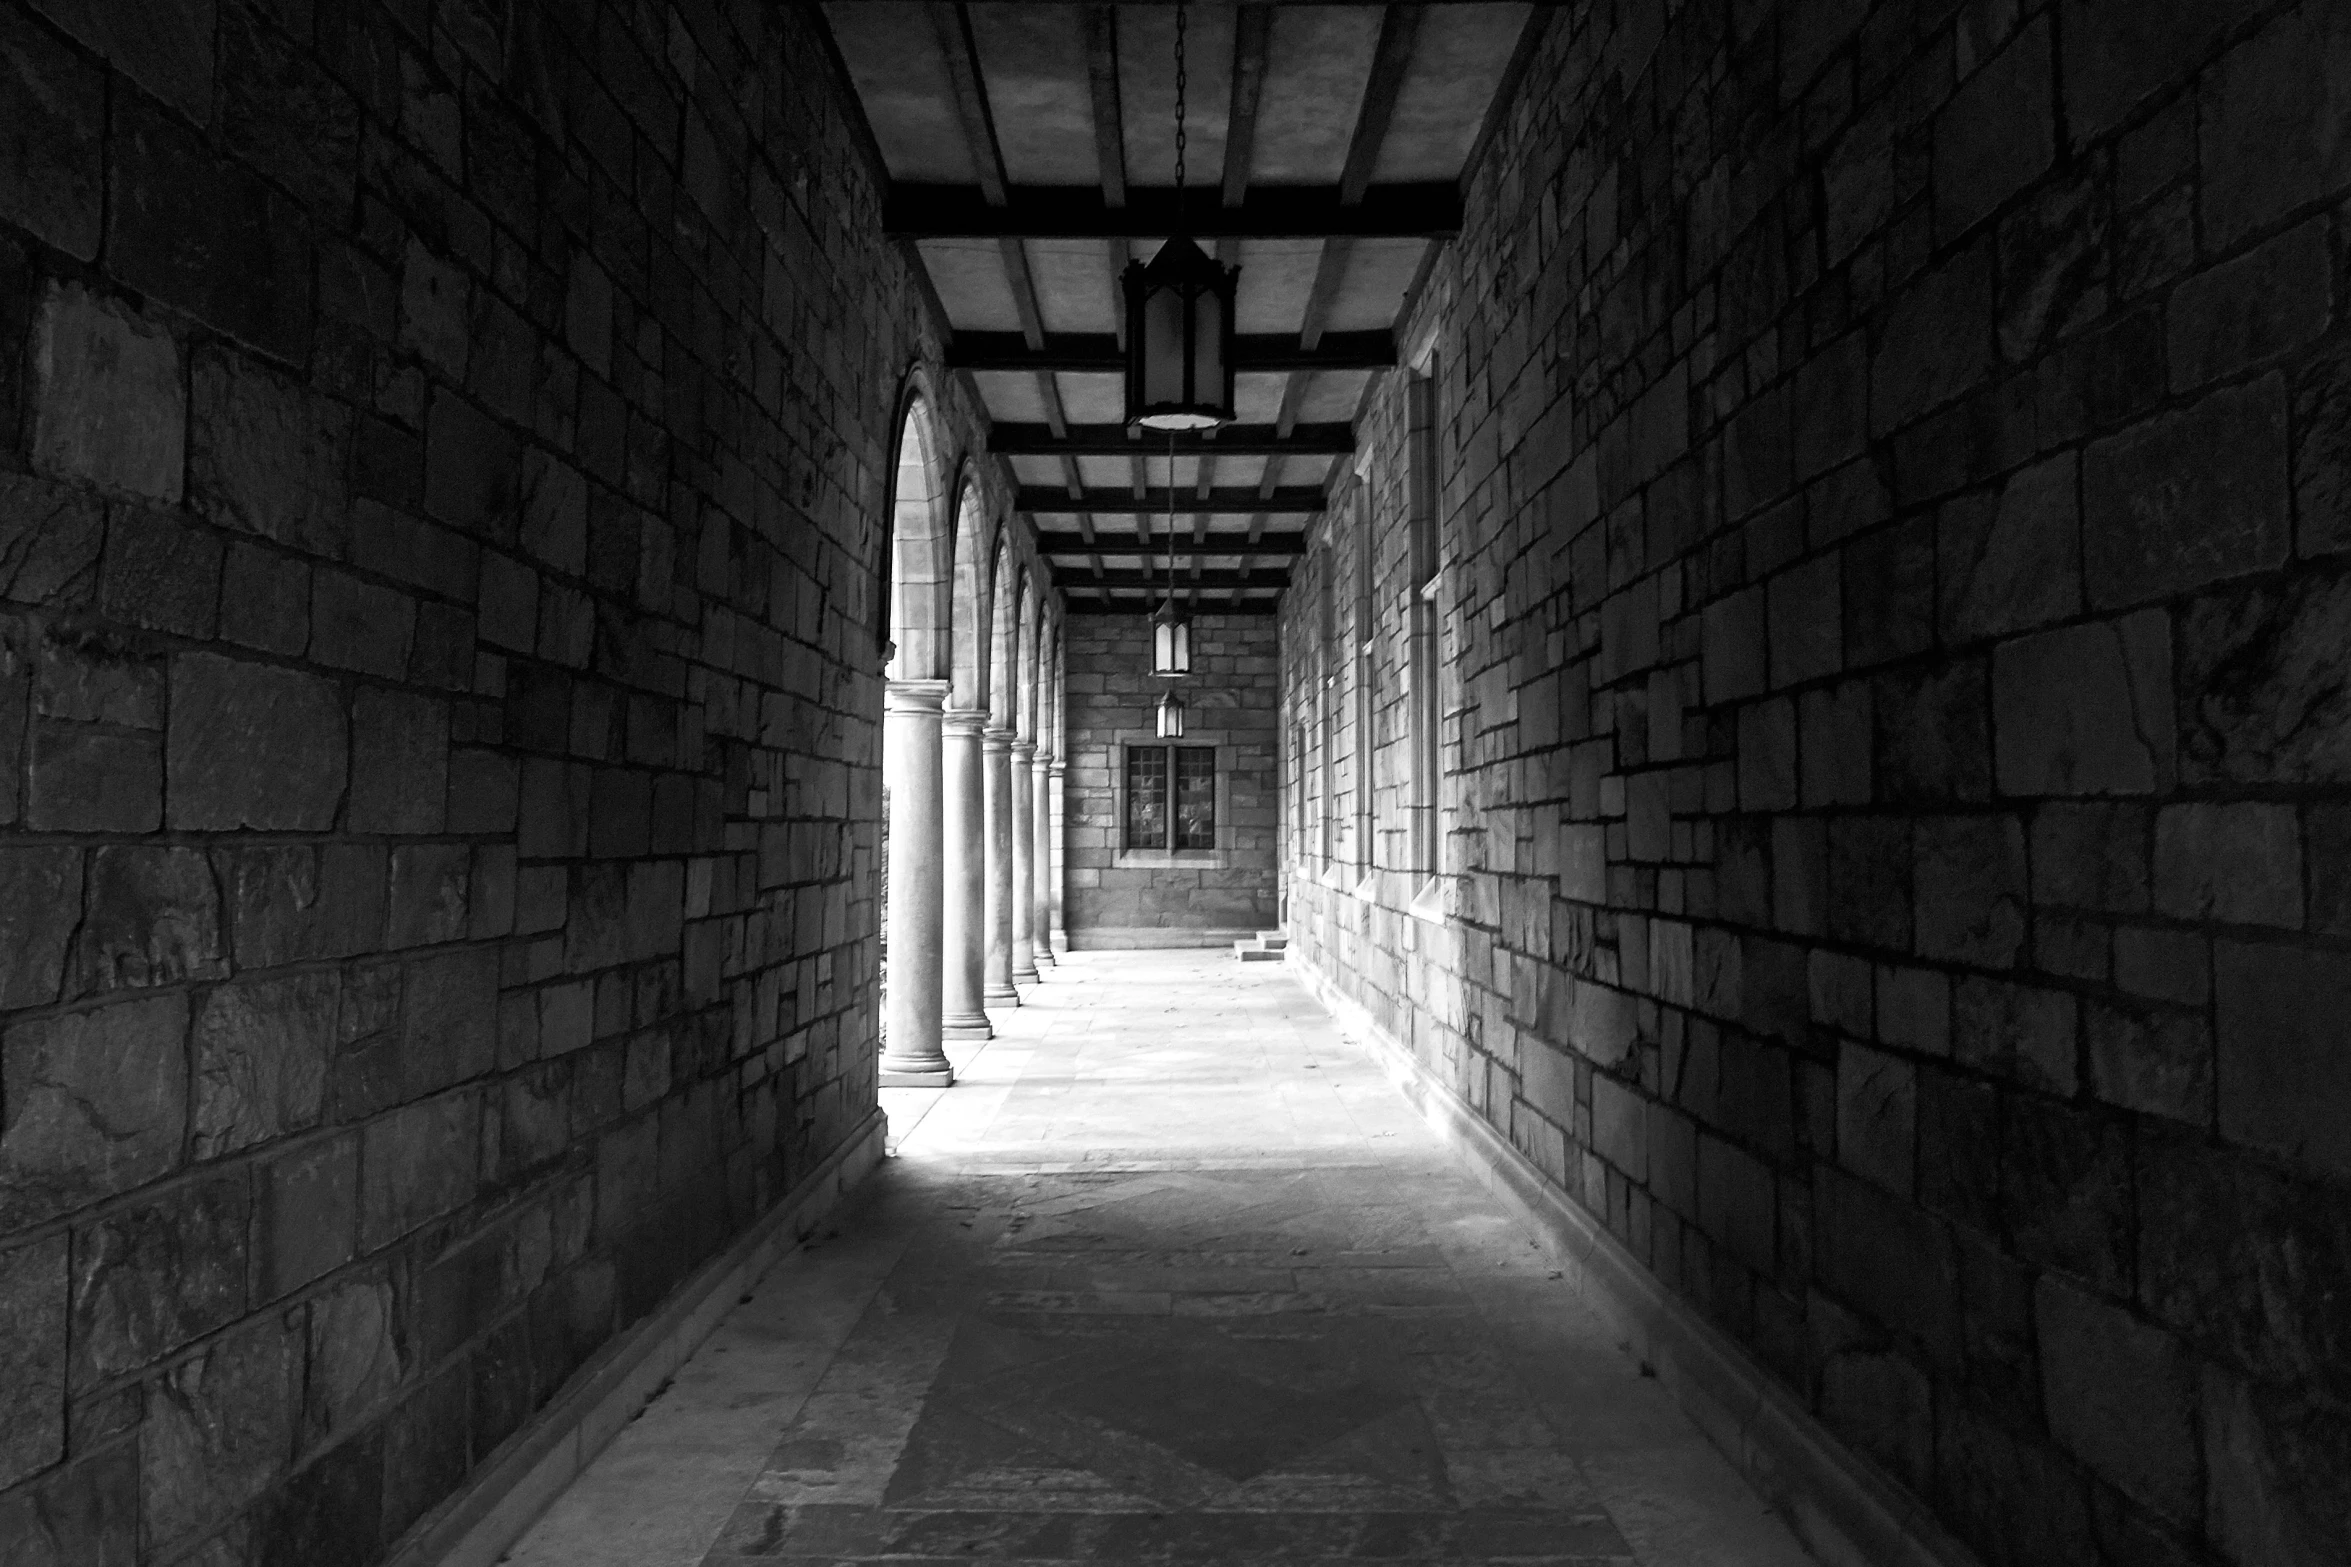 long hallway lined with pillars that are built into each other